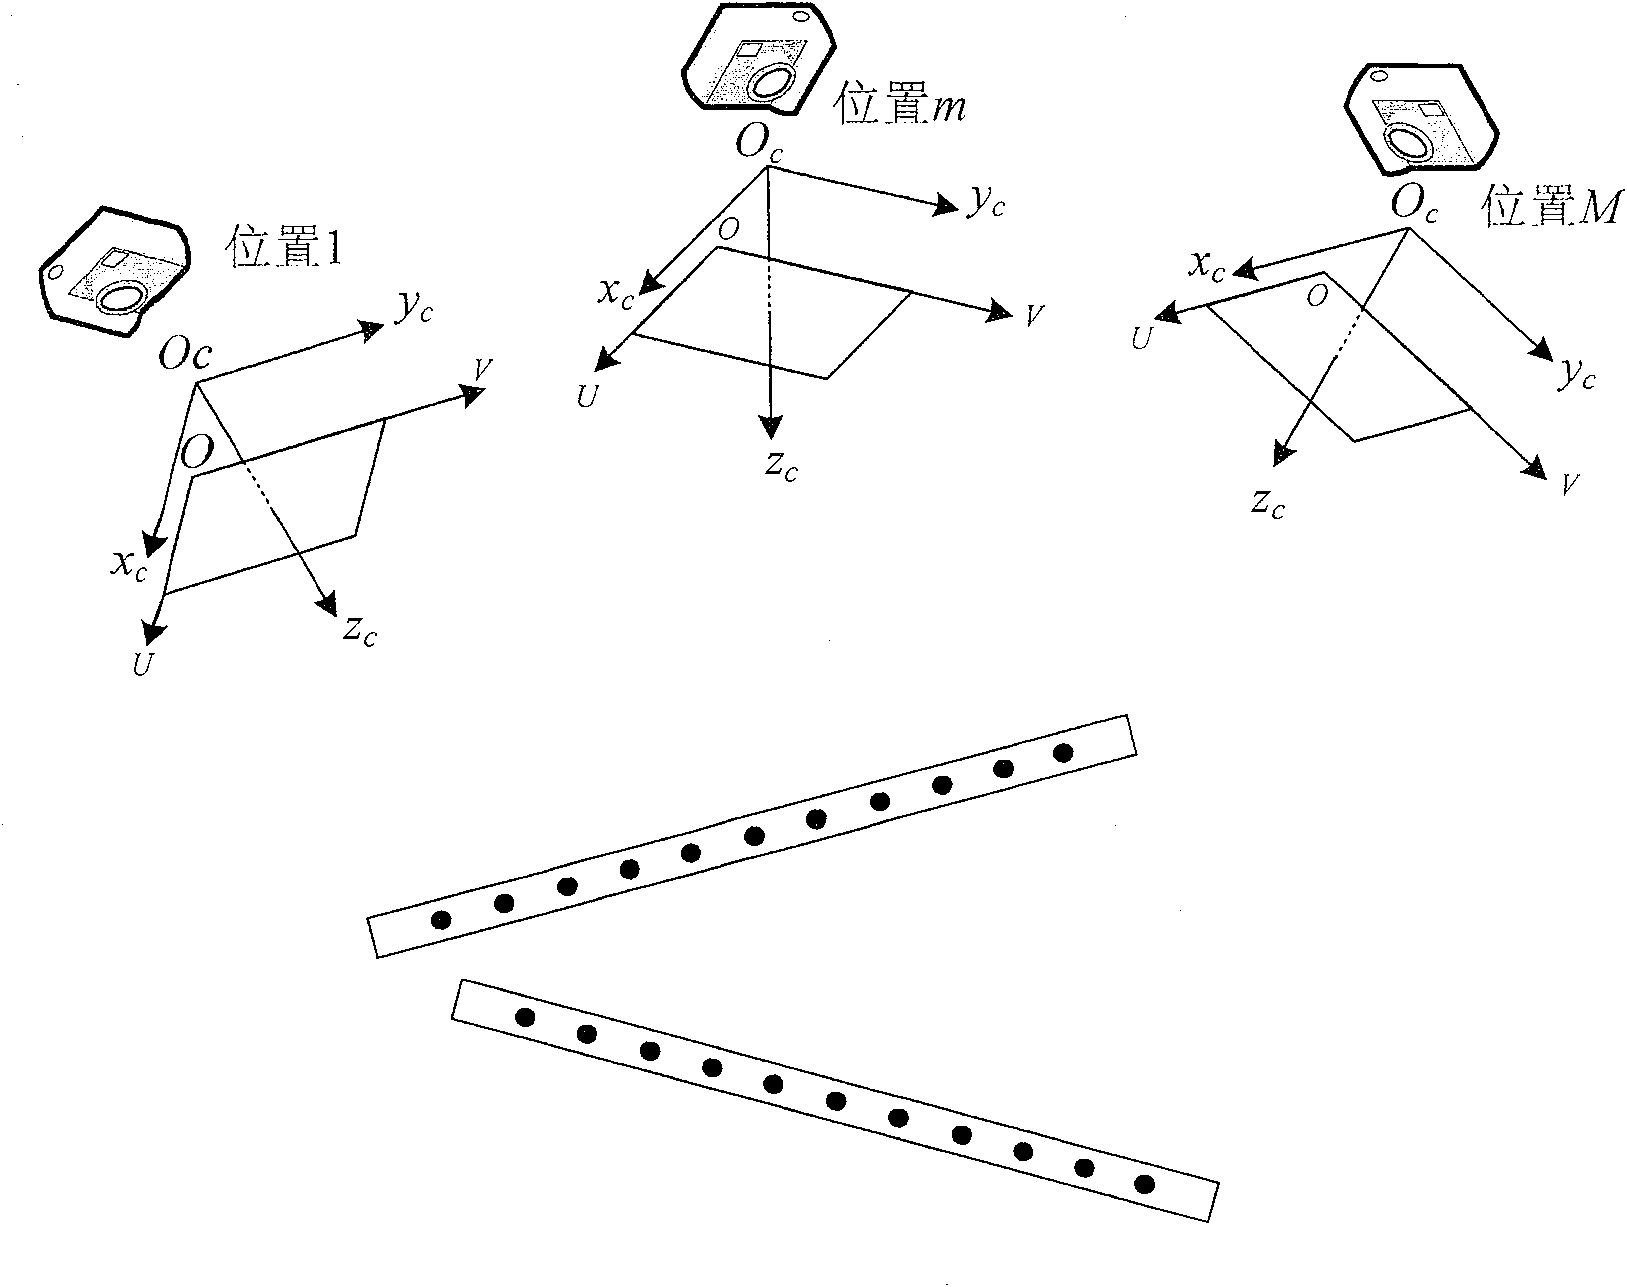 A camera marking method based on double 1-dimension drone